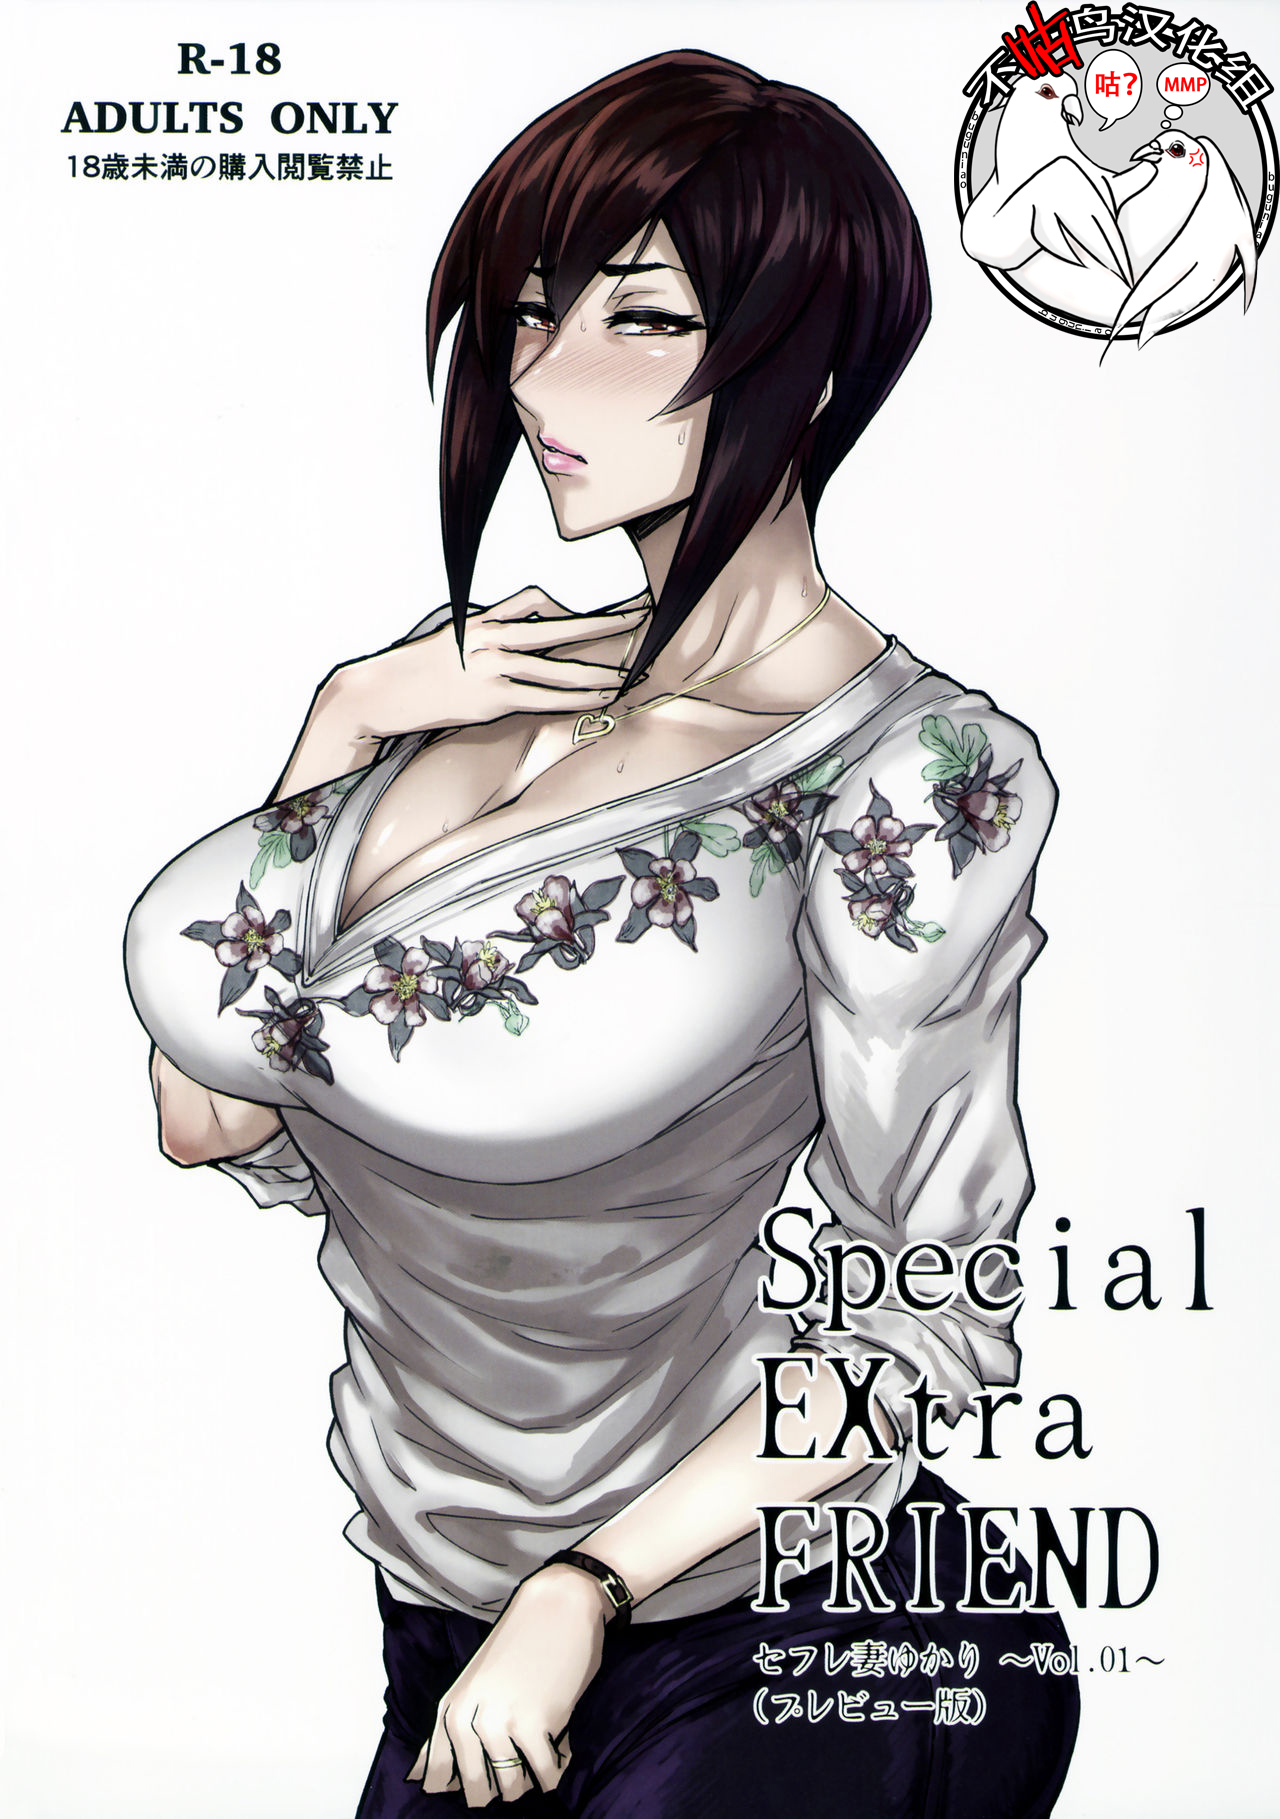 (COMITIA120) [Isocurve (Allegro)] Special EXtra FRIEND SeFrie Tsuma Yukari Vol.01(Preview Version) [Chinese] [不咕鸟汉化组] (コミティア120) [アイソカーブ (アレグロ)] Special EXtra FRIEND セフレ妻ゆかり Vol.01(プレビュー版) [中国翻訳]